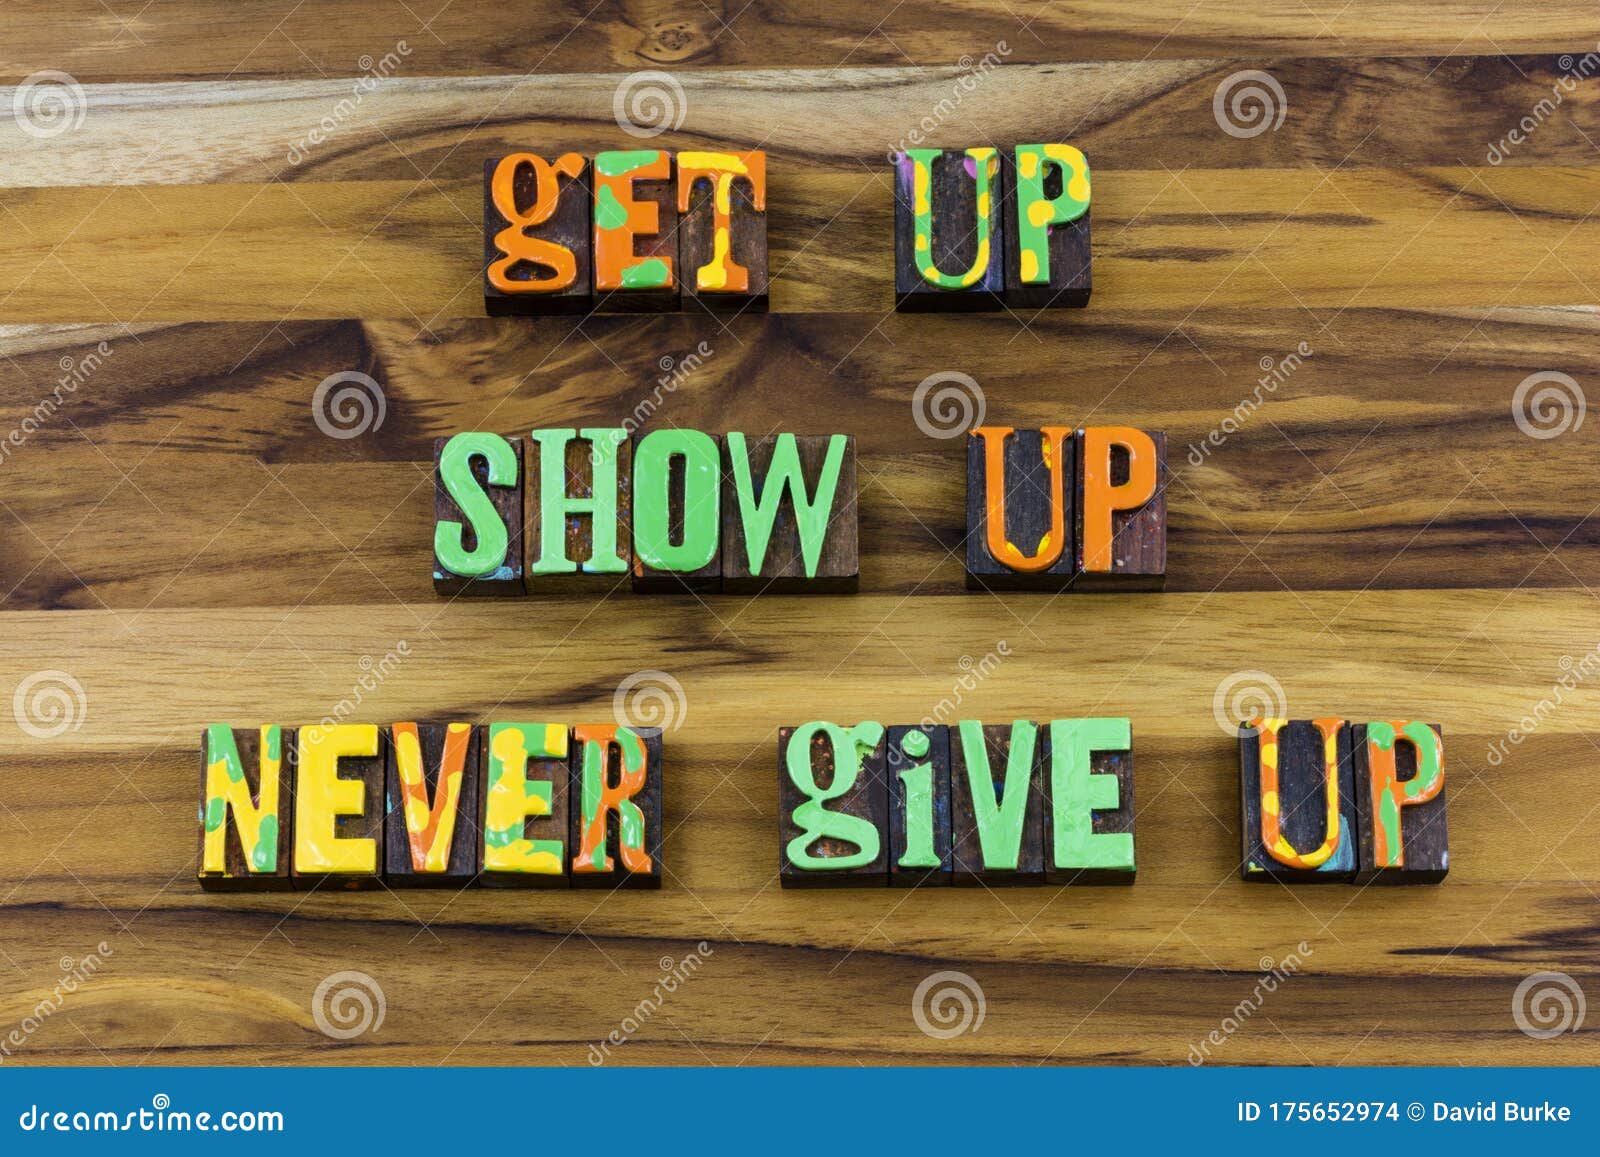 get up show hard work never give quit try again determination